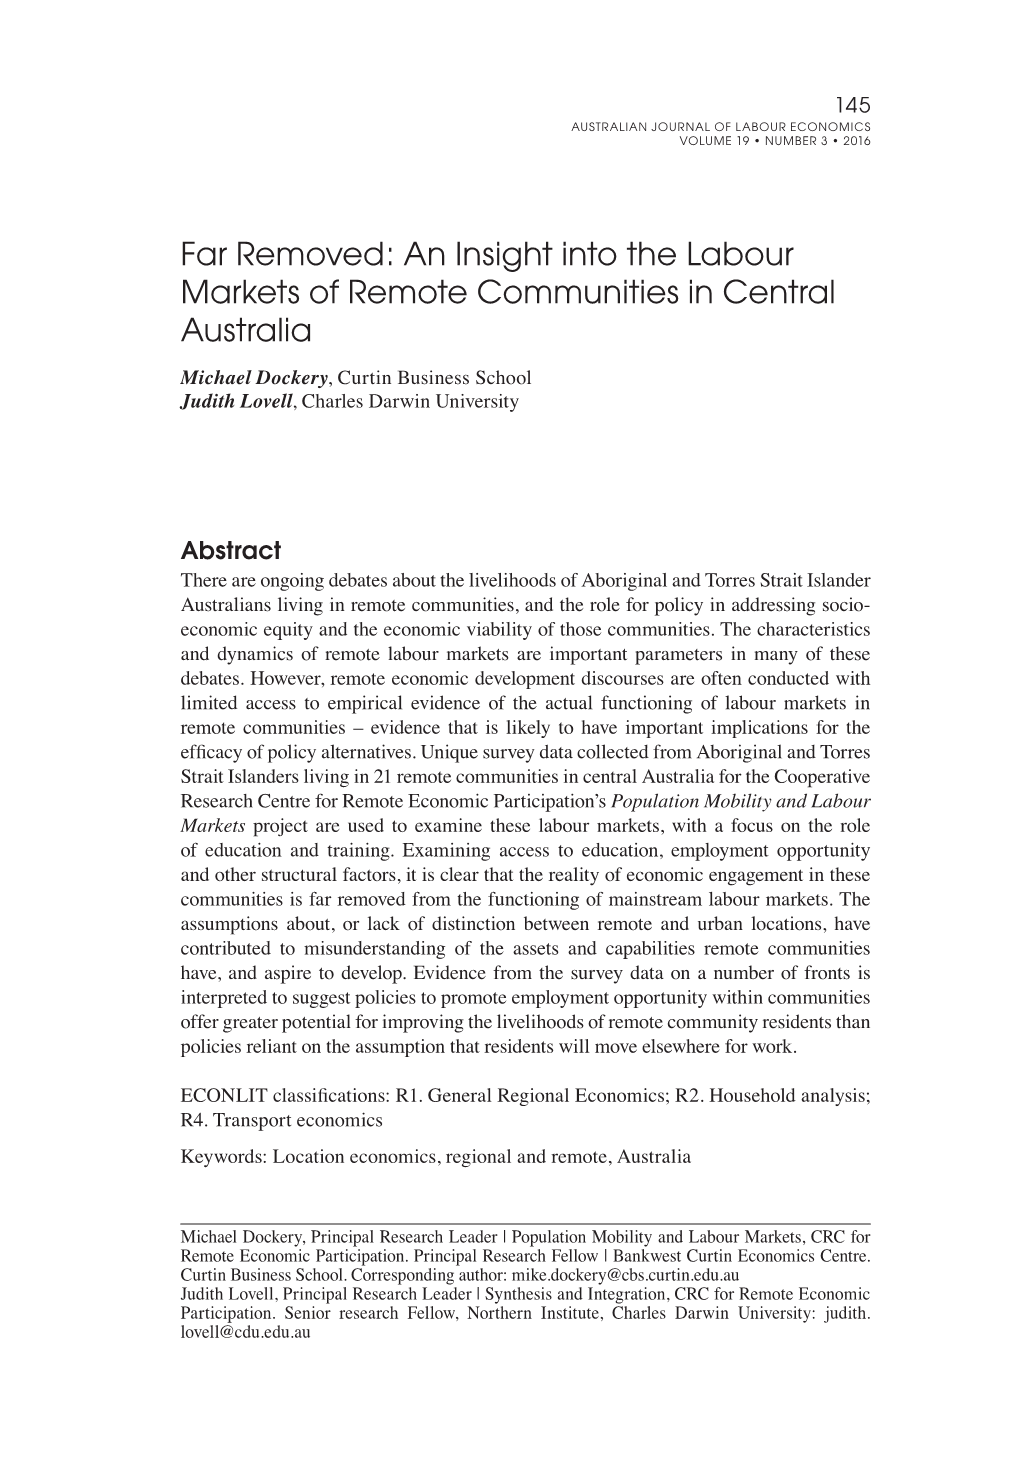 Far Removed: an Insight Into the Labour Markets of Remote Communities in Central Australia